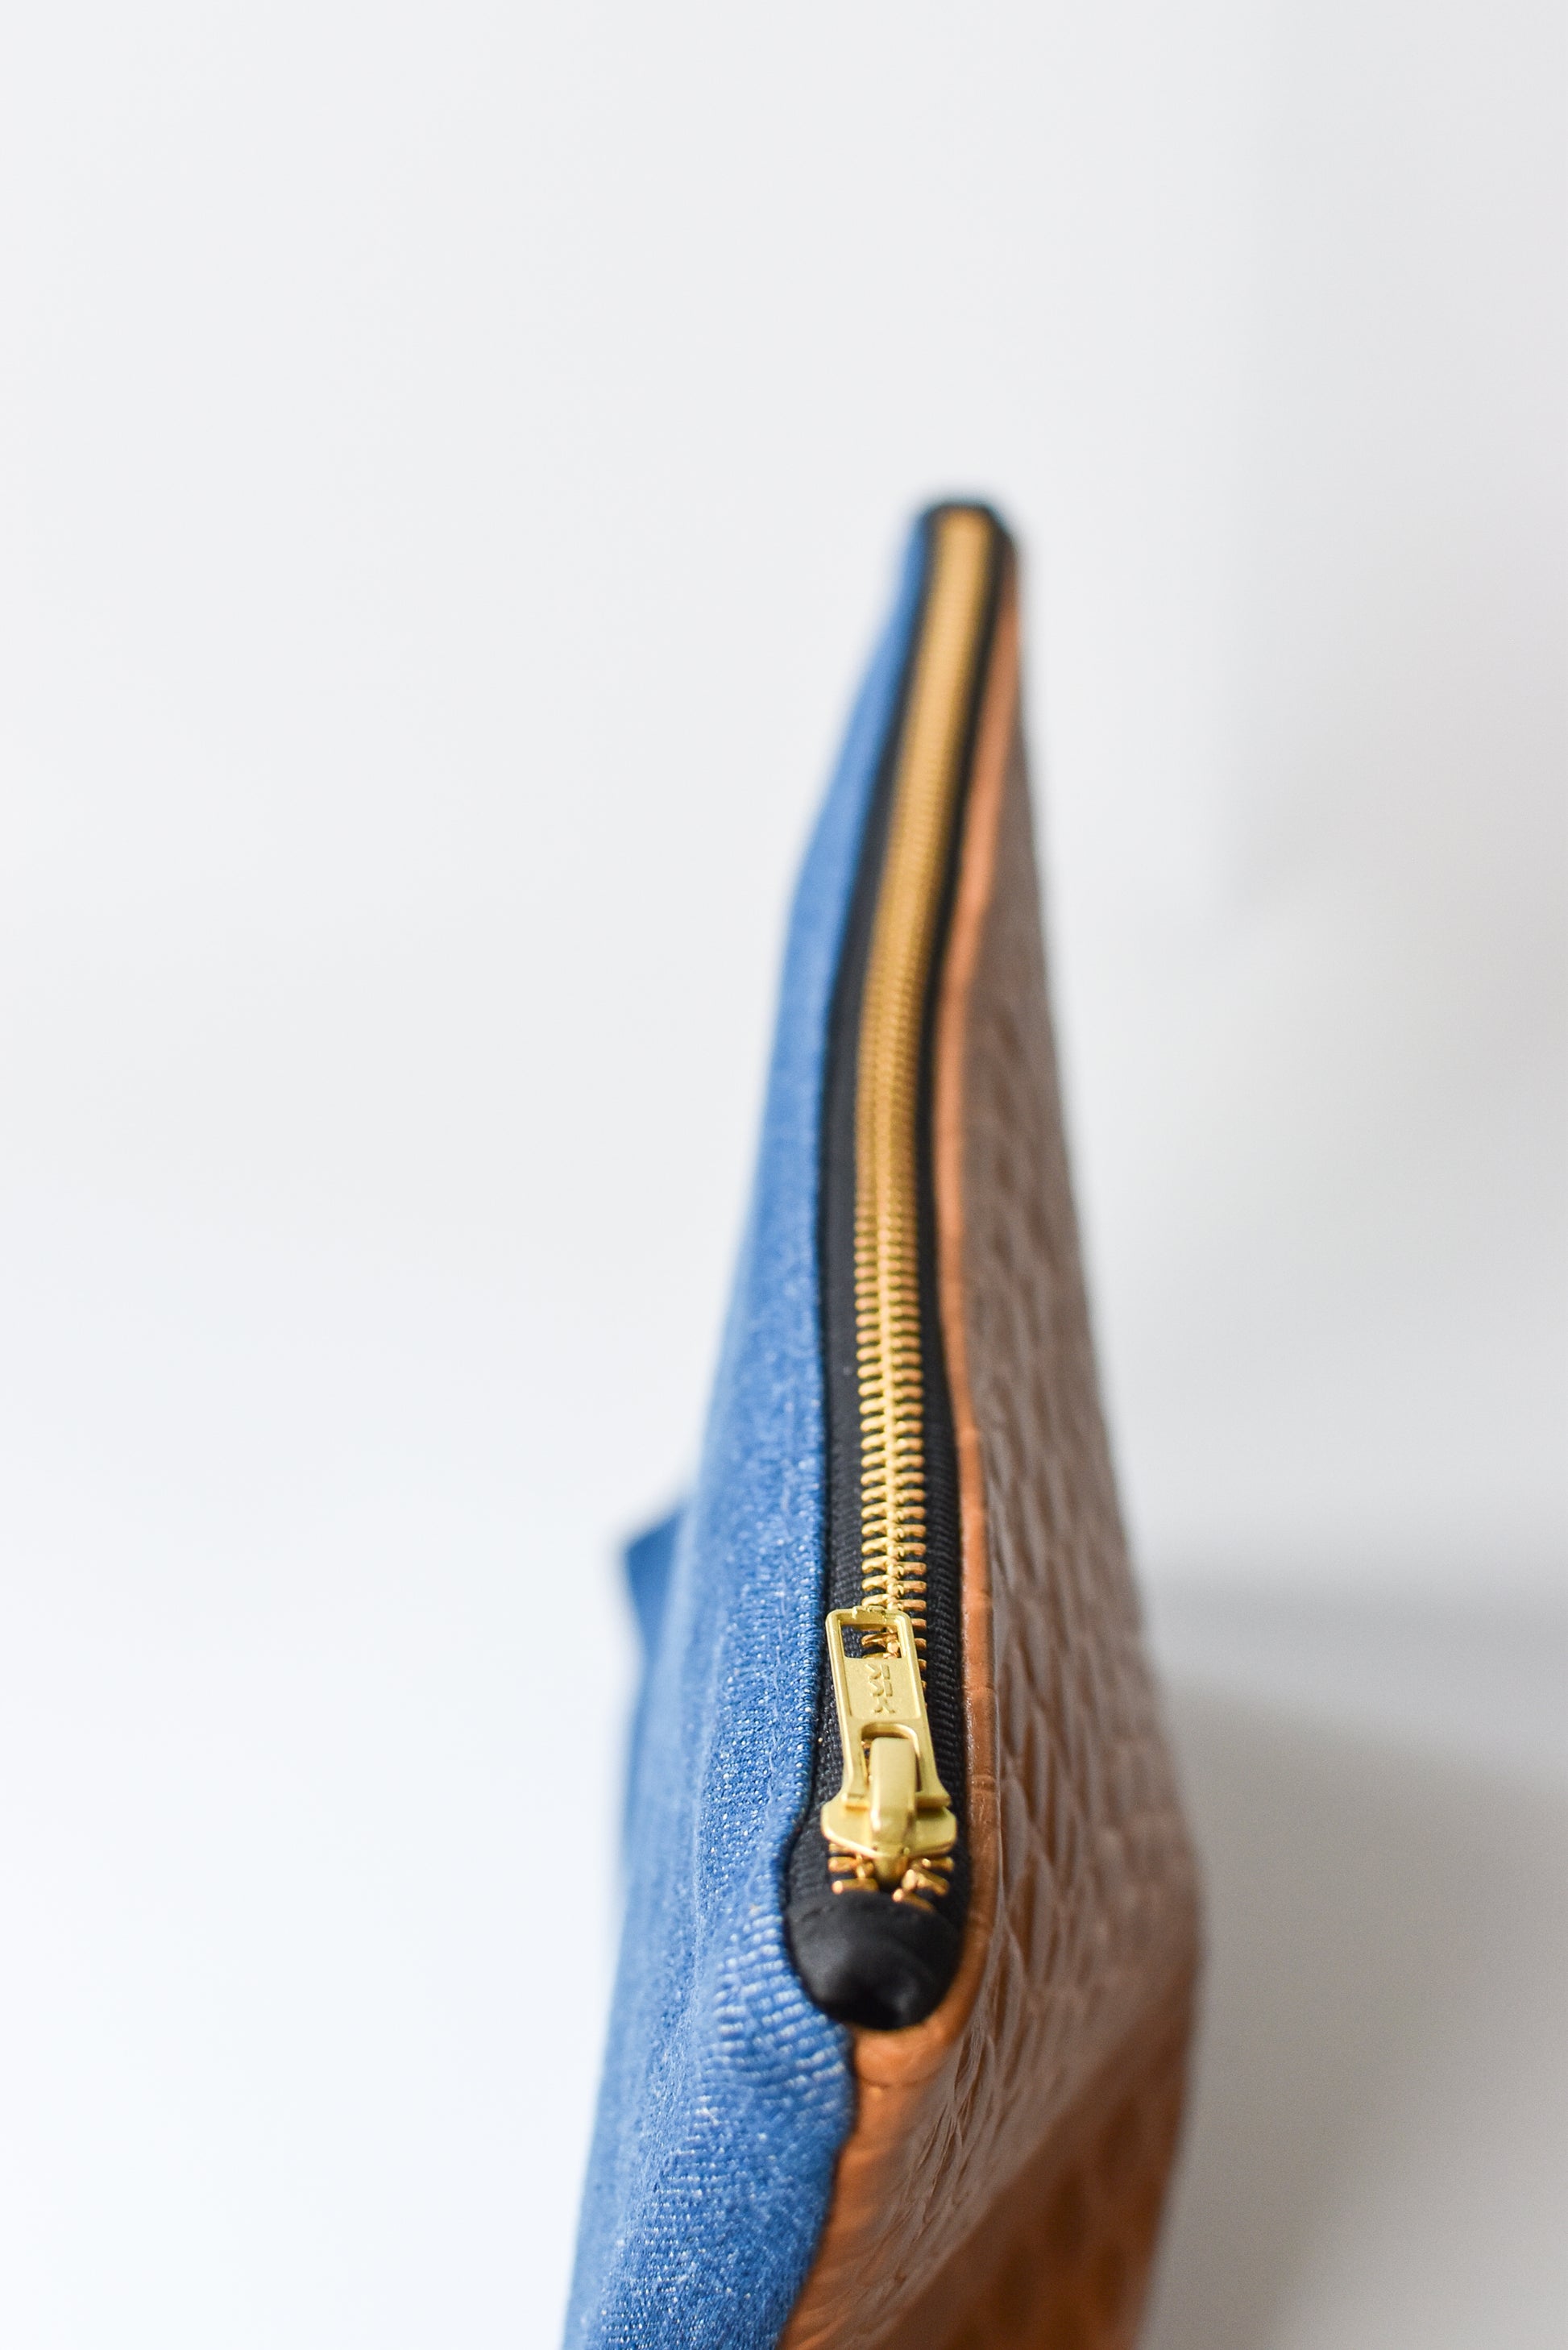 Medium wash denim and caramel colored embossed leather skin small pouch with brass zipper and leather logo label.